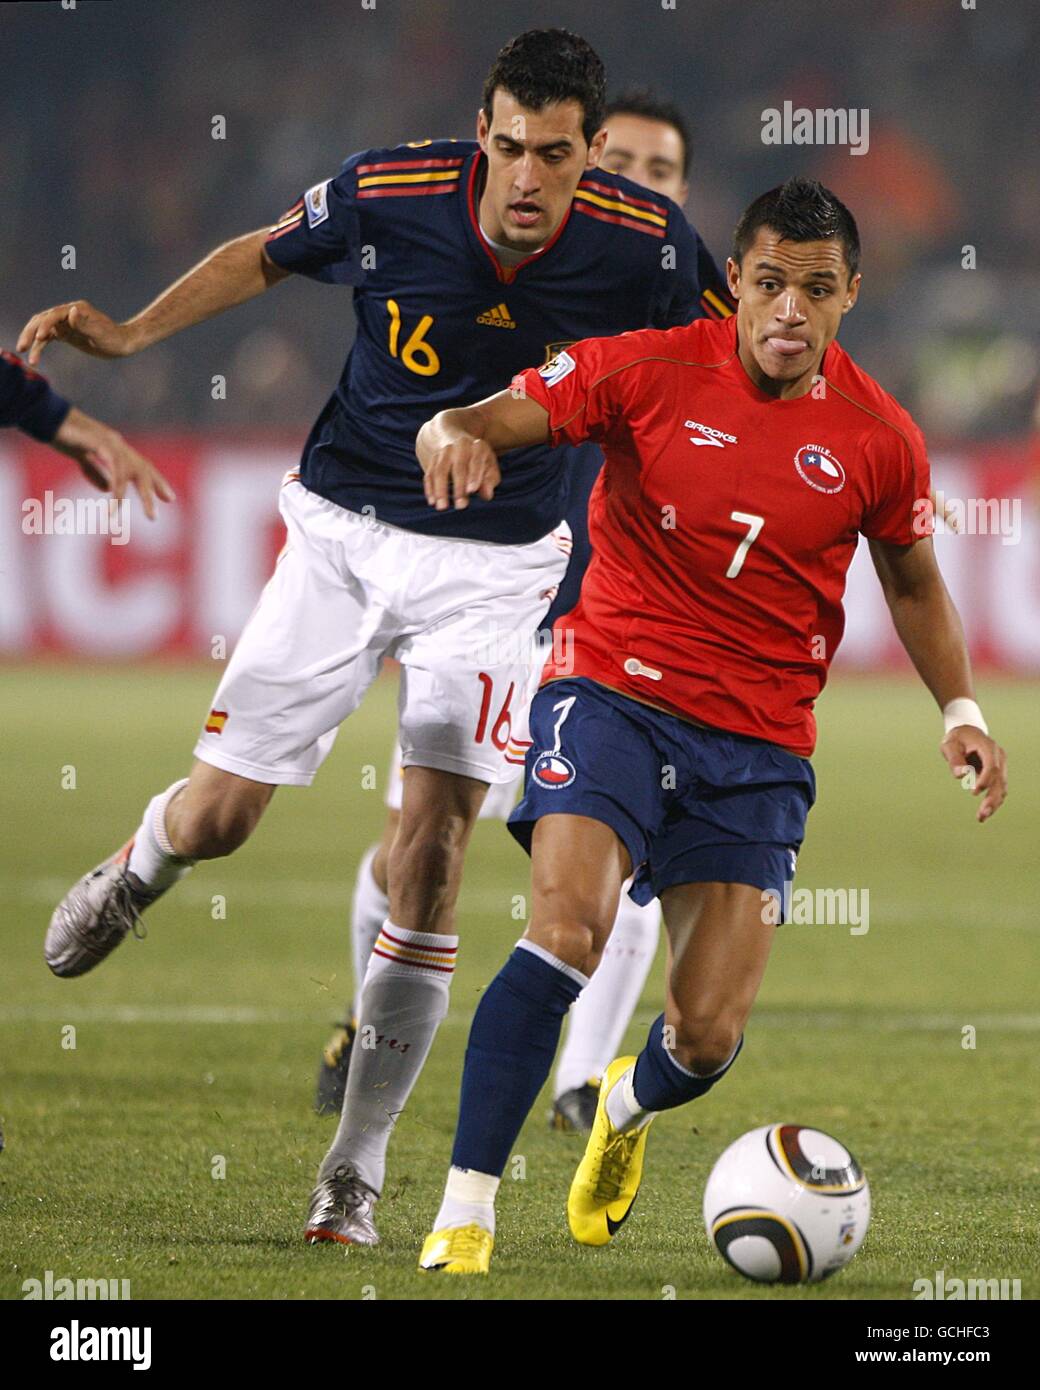 Soccer - 2010 FIFA World Cup South Africa - Group H - Chile v Spain - Loftus Versfeld Stadium. Chile's Alexis Sanchez (right) and Spain's Sergio Busquets (left) battle for the ball Stock Photo